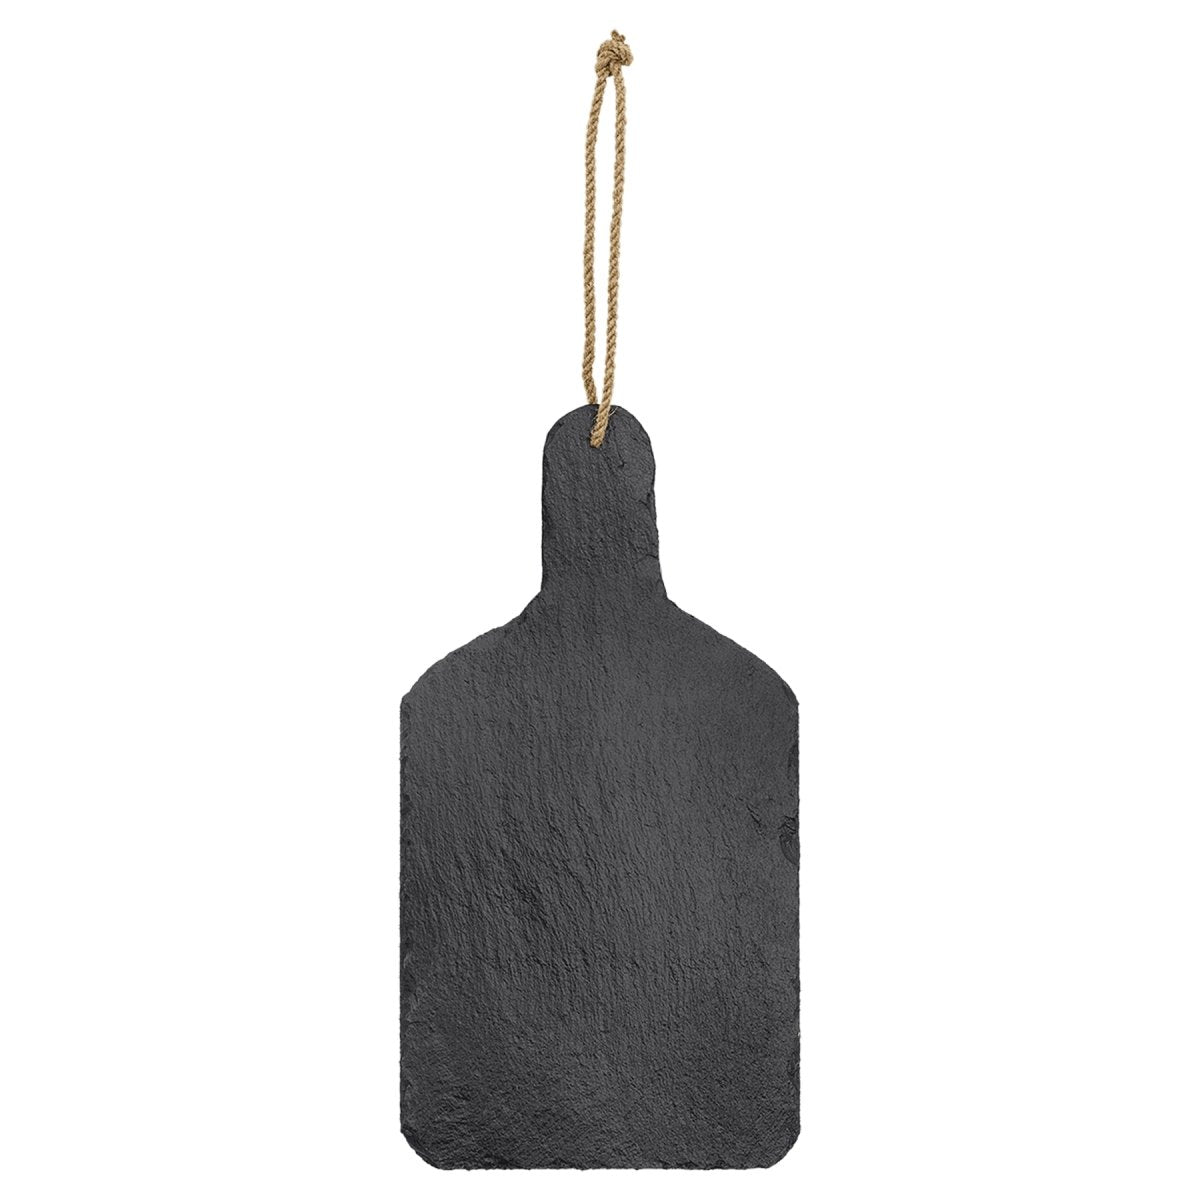 Laserable Slate Cutting Board with Handle and Hanger String, 13.5" x 7" - Inkfinitee Sublimation